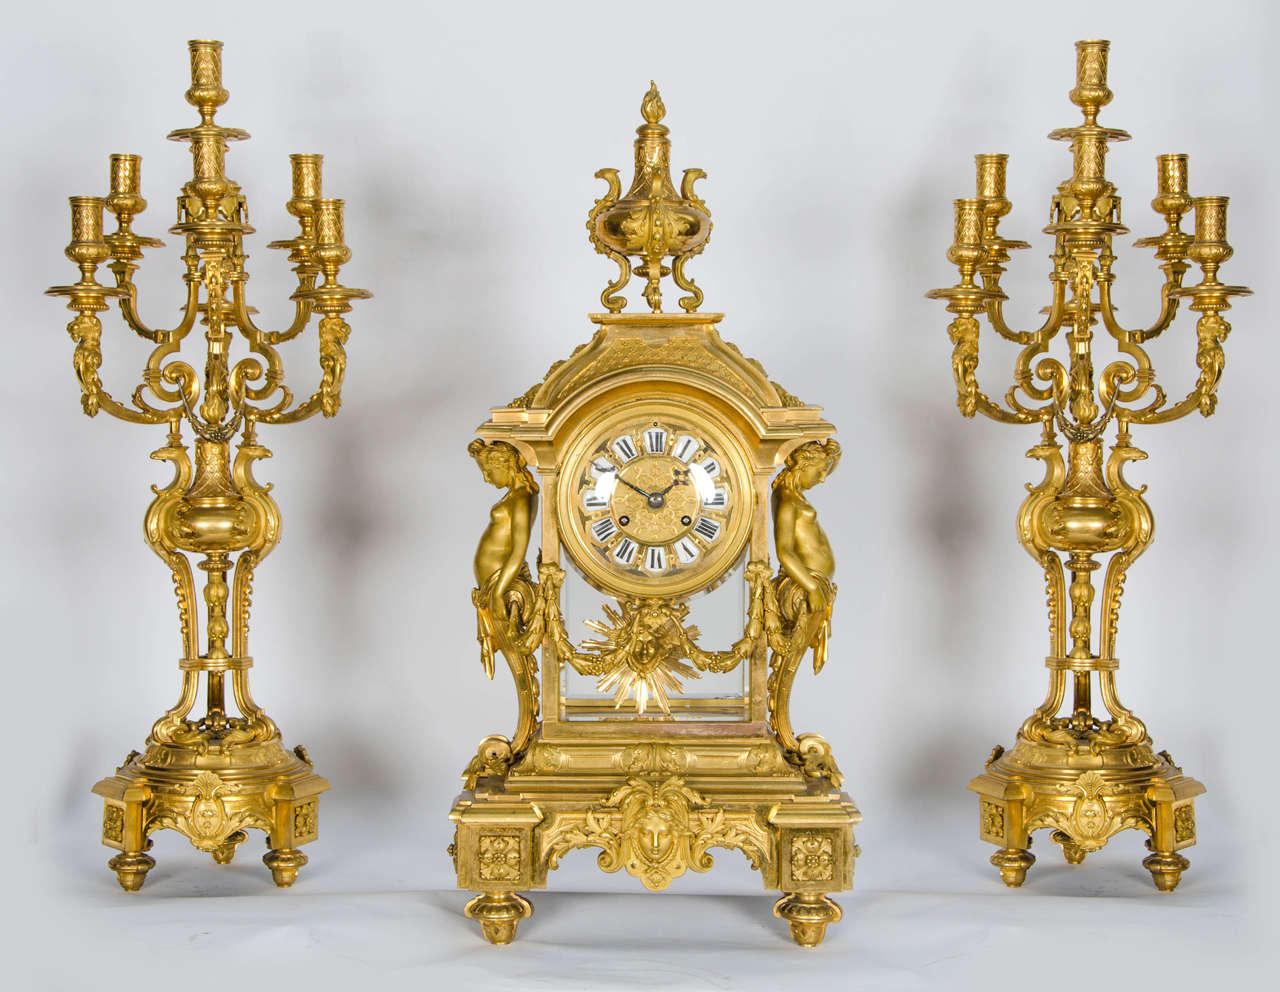 A large and impressive, very good quality French gilded ormolu clock garniture. The clock supported by a pair of Caryatids, decorated with swags and classical motifs, four bevelled glass panels and a sunburst pendulum.
The candelabra each having